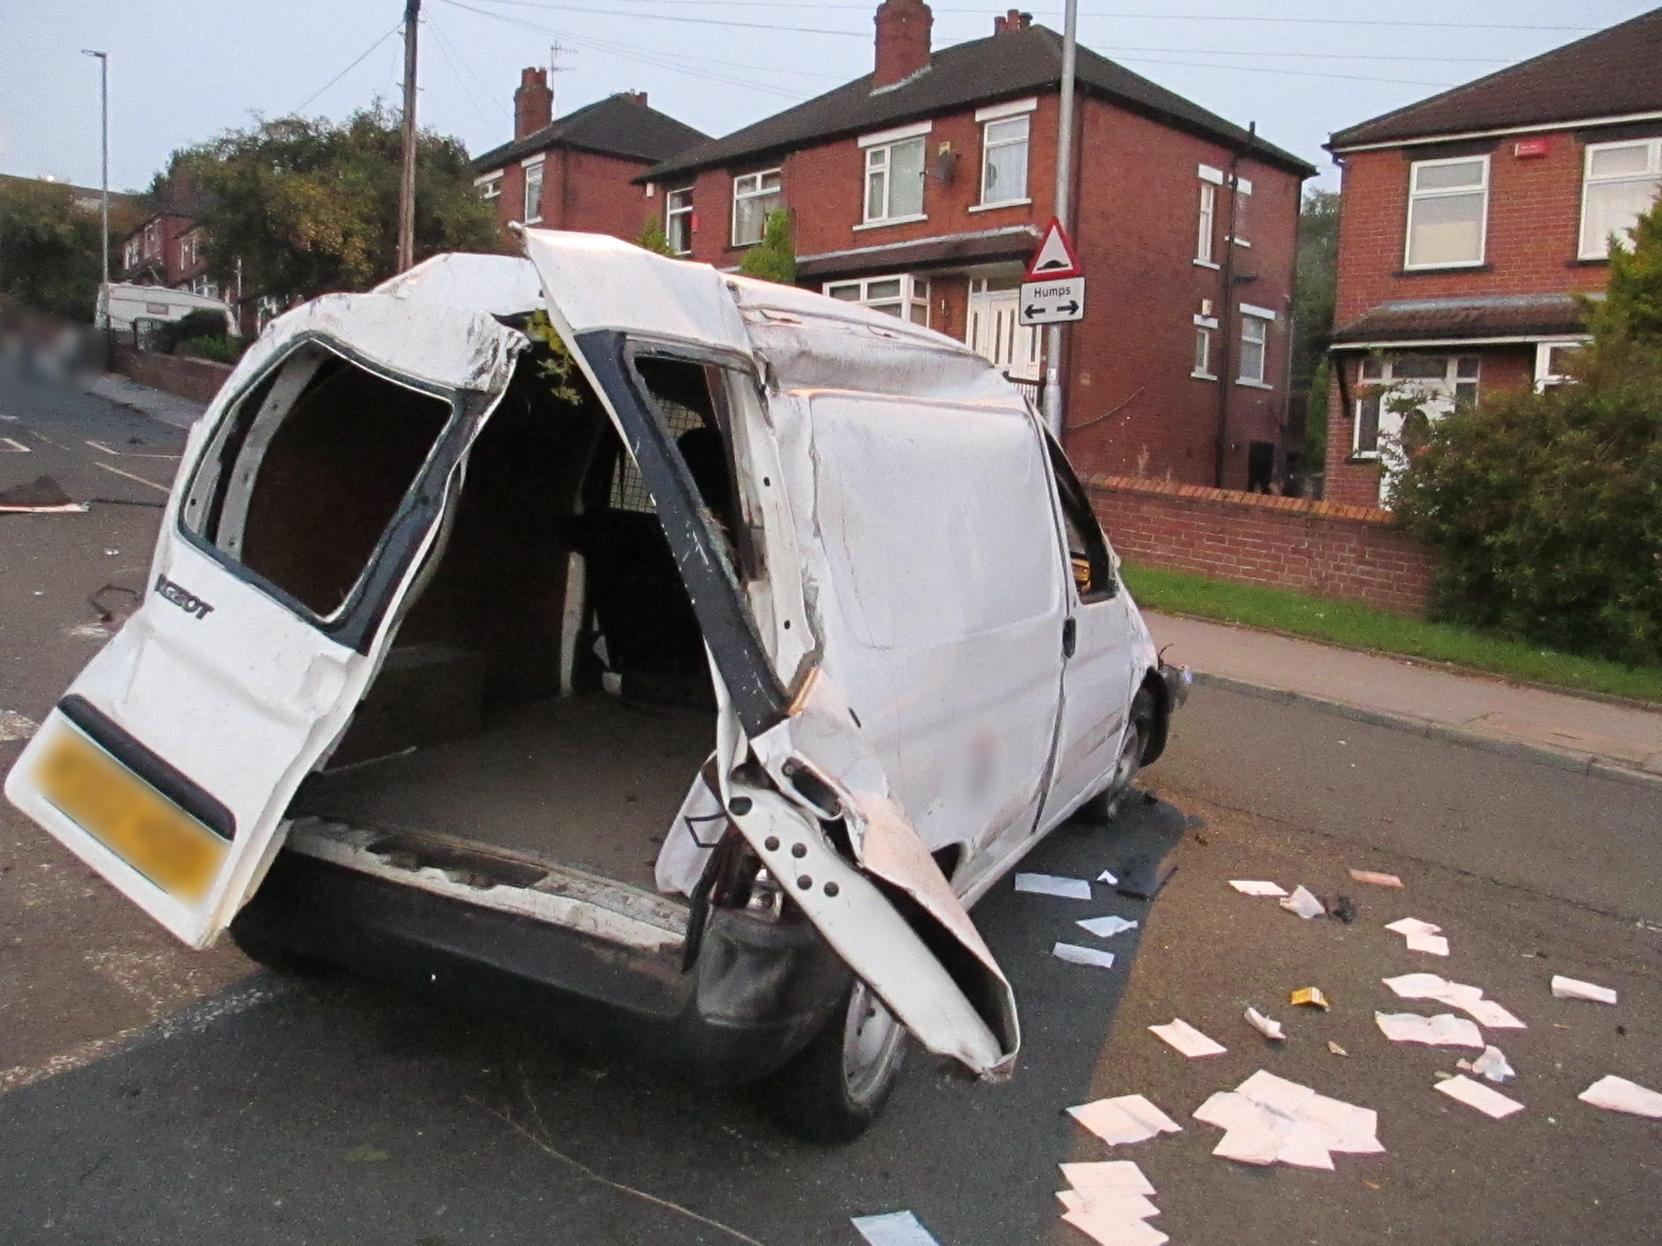 Residents in Stonebridge Lane are calling on Leeds City Council to take action after as many as a dozen crashes outside their homes in the past five years.